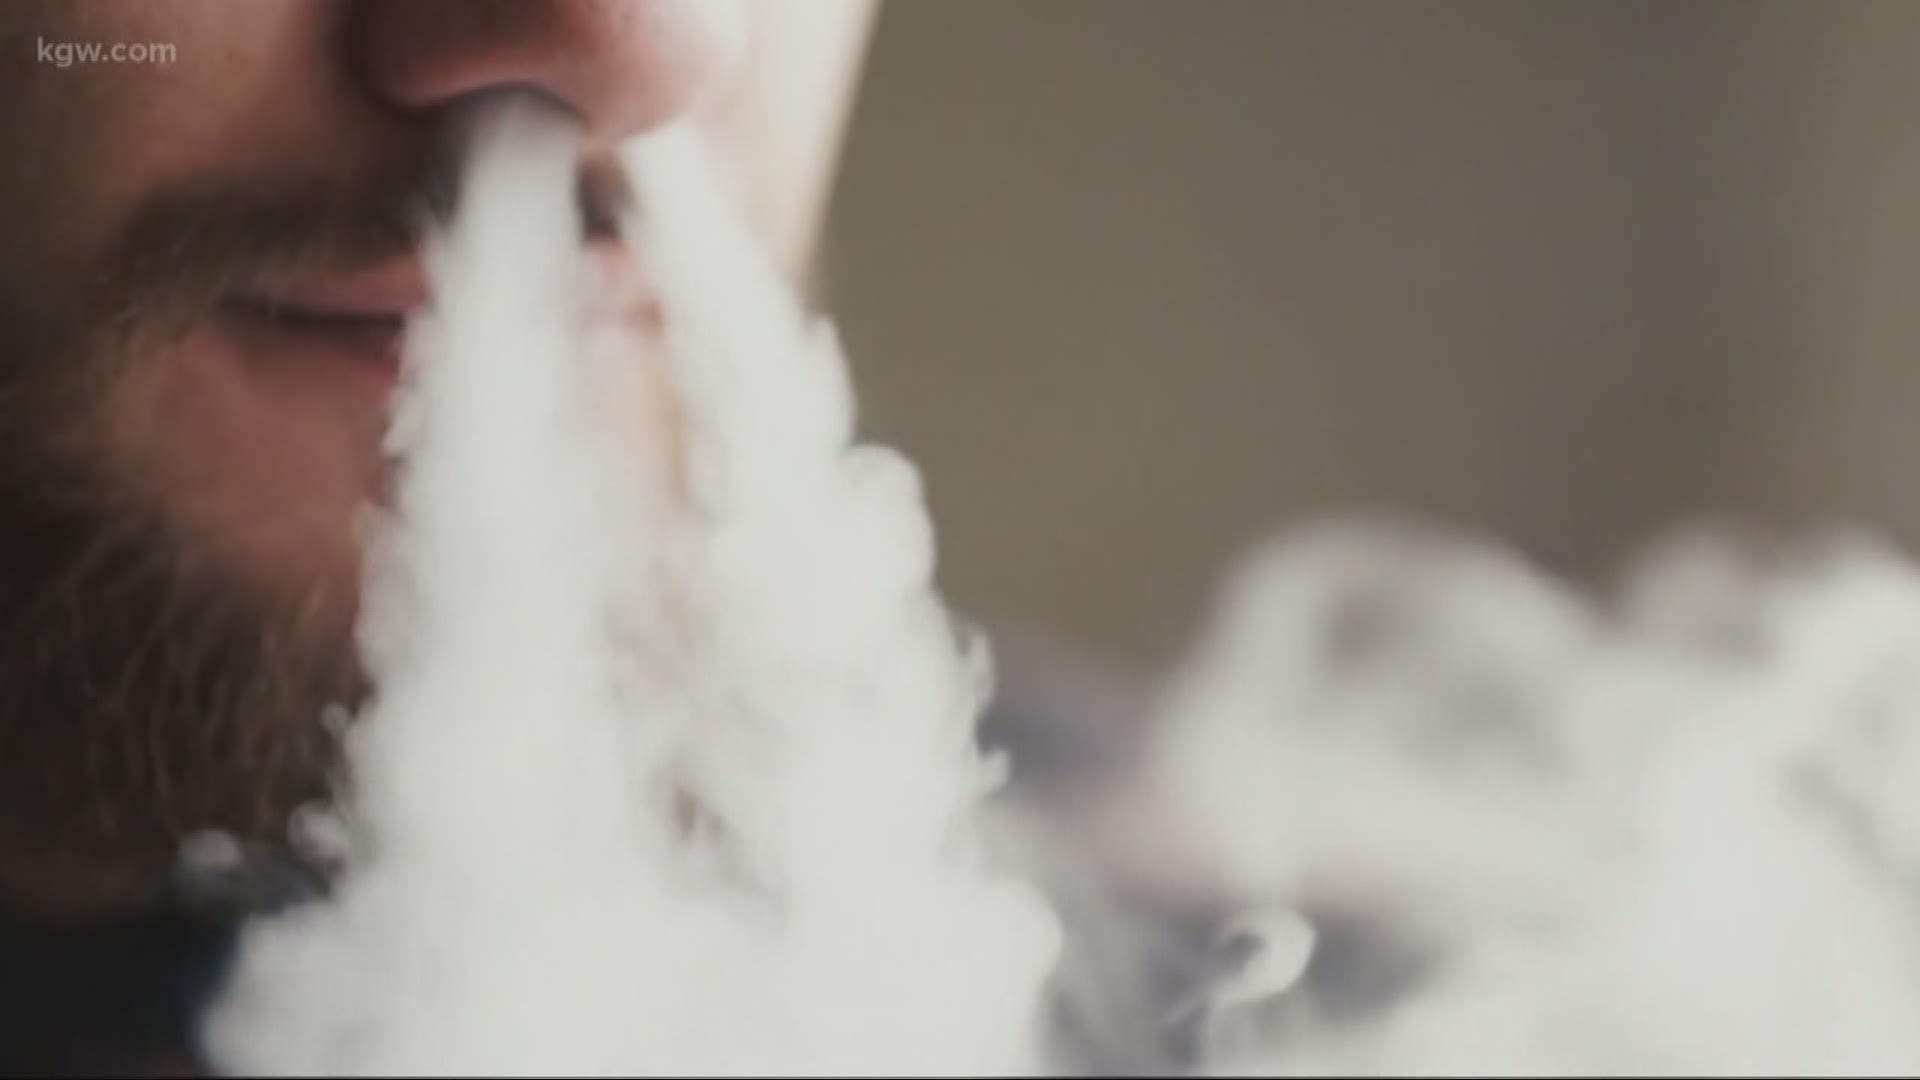 The Centers for Disease Control and Prevention is warning the public that they've seen a variety of illnesses they believe are connected to vaping.